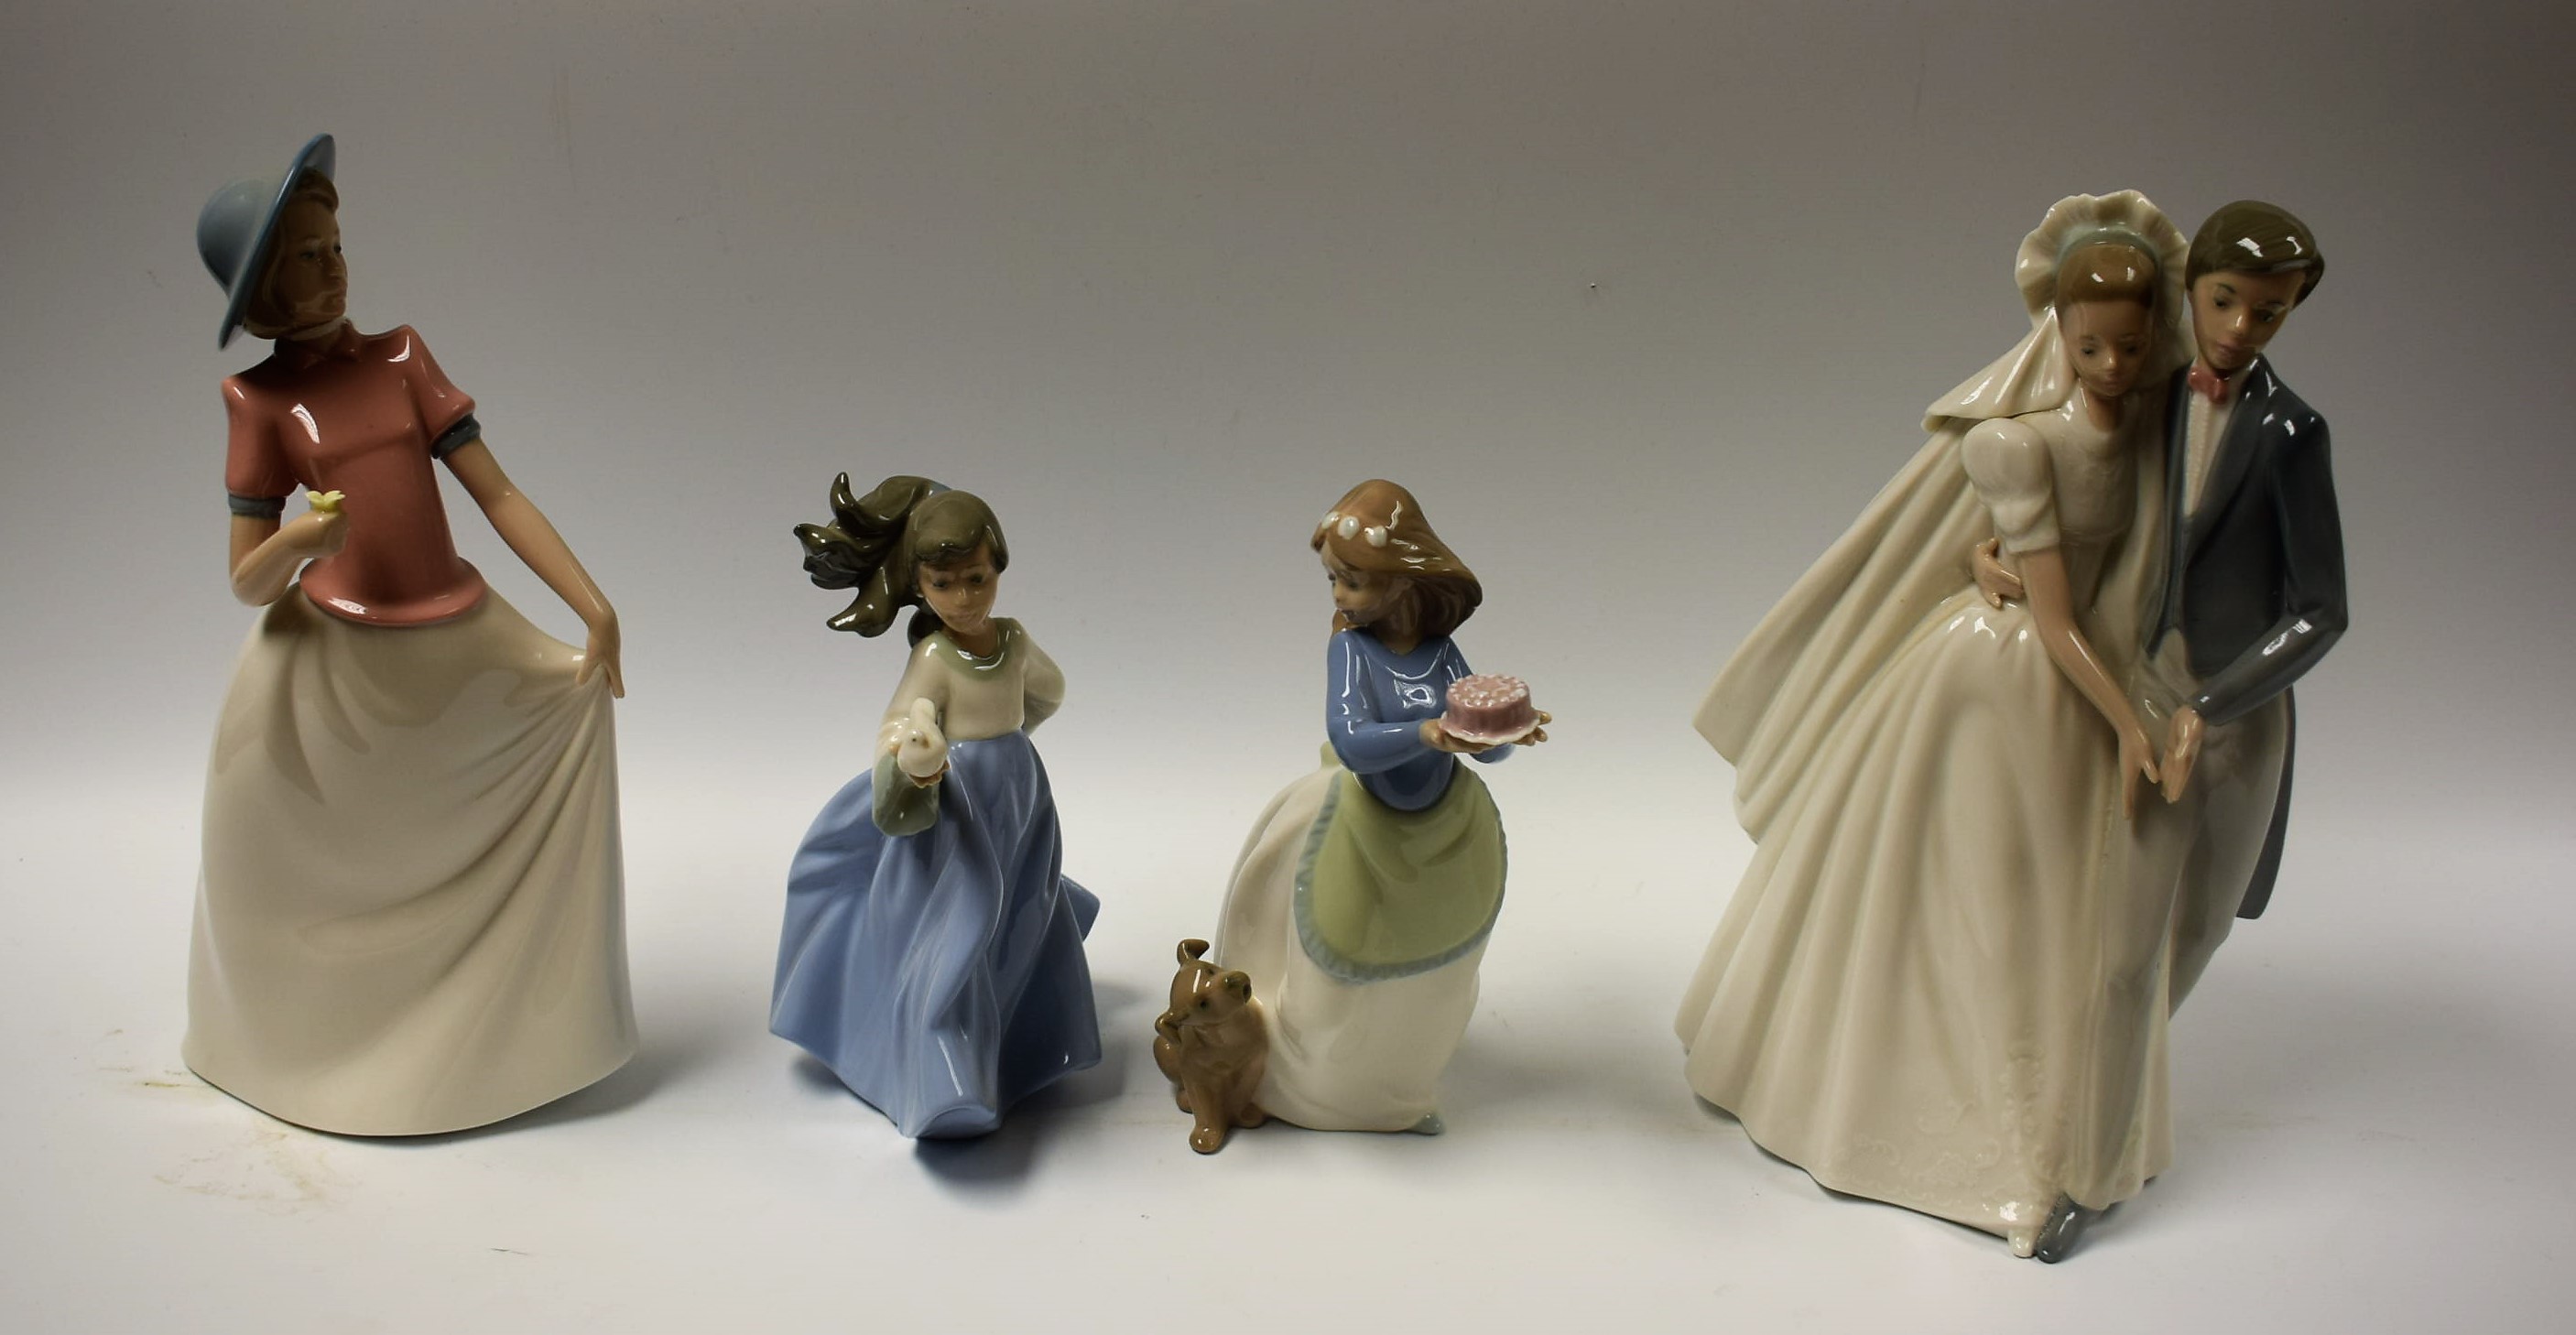 A Nao Spanish porcelain figure group The Bride and Groom; other Nao porcelain figures,